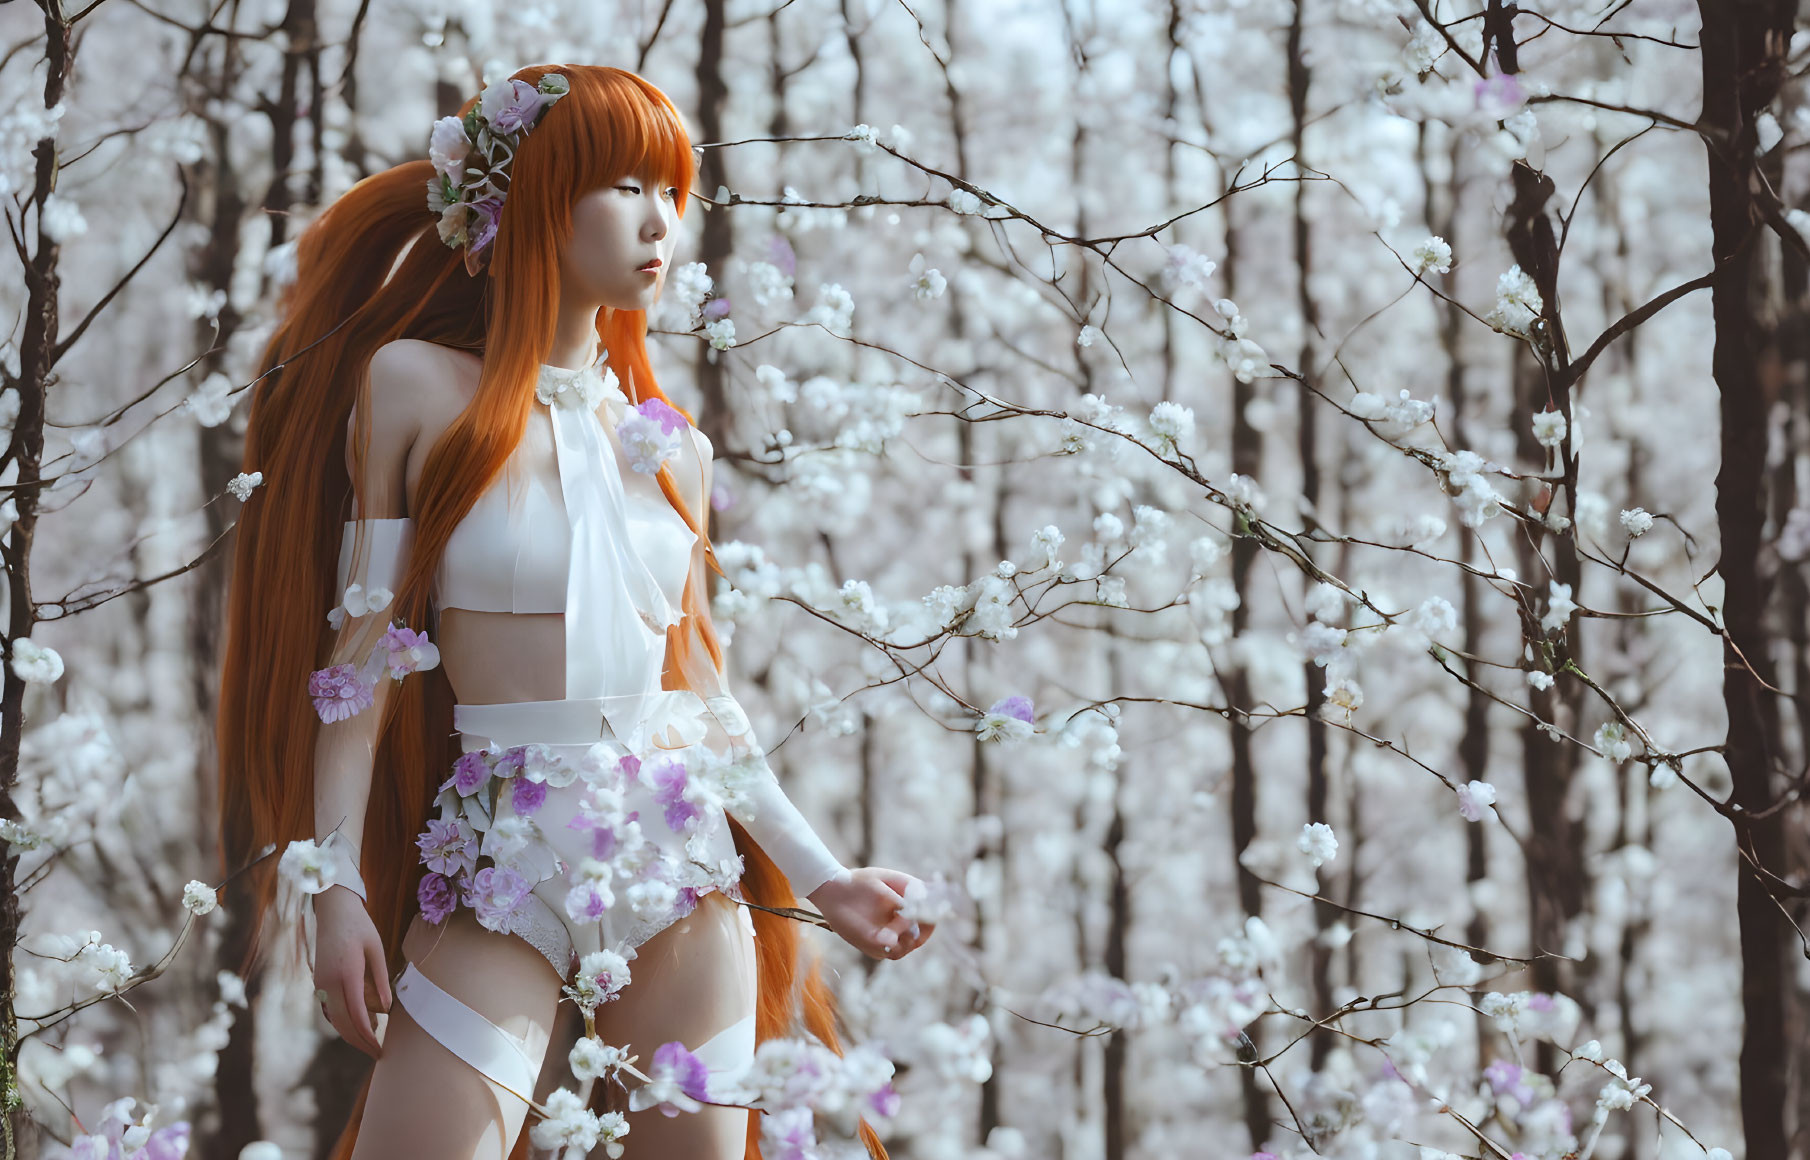 Cosplayer with Long Orange Hair Among White Blooming Trees